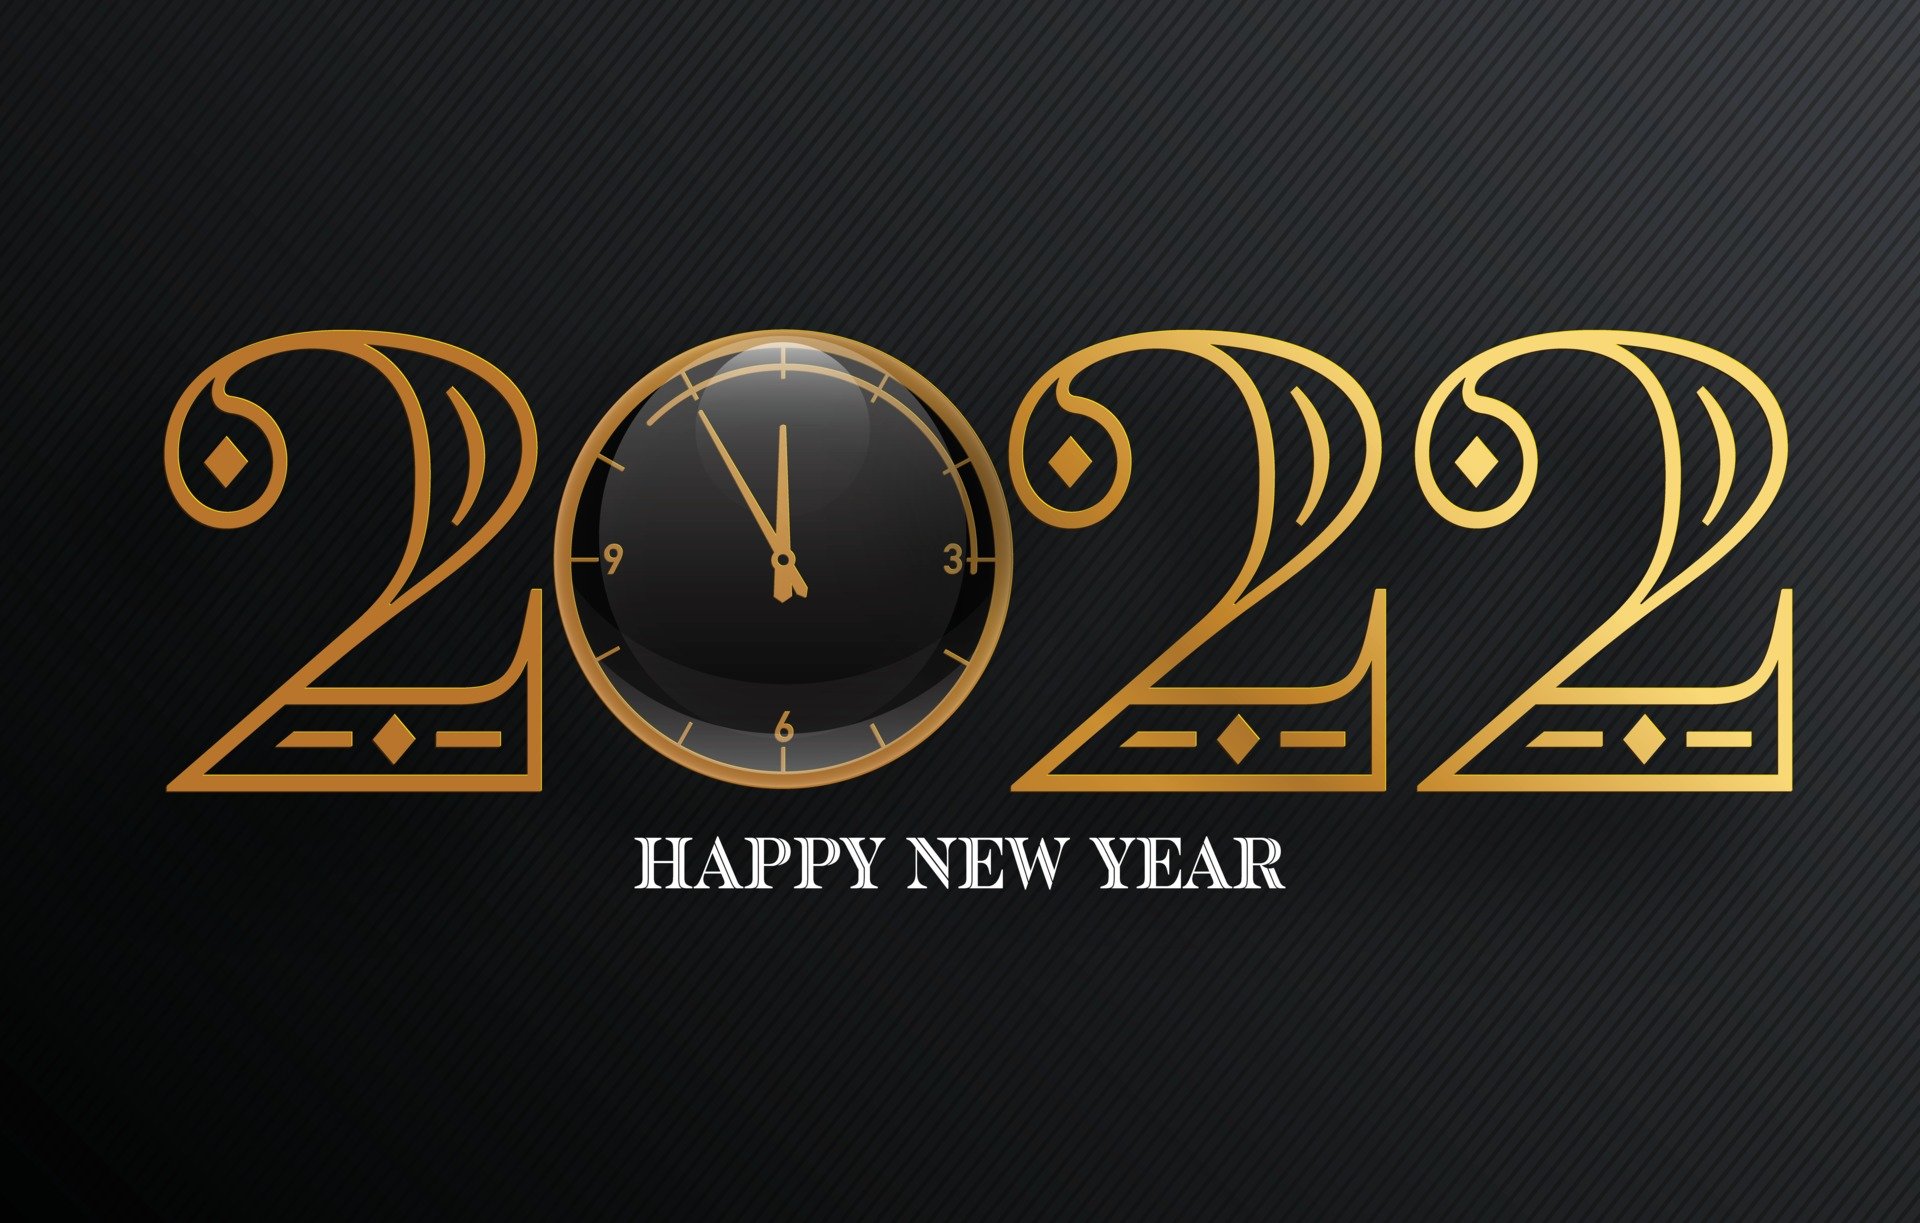 Image of Happy New Year 2022 Images